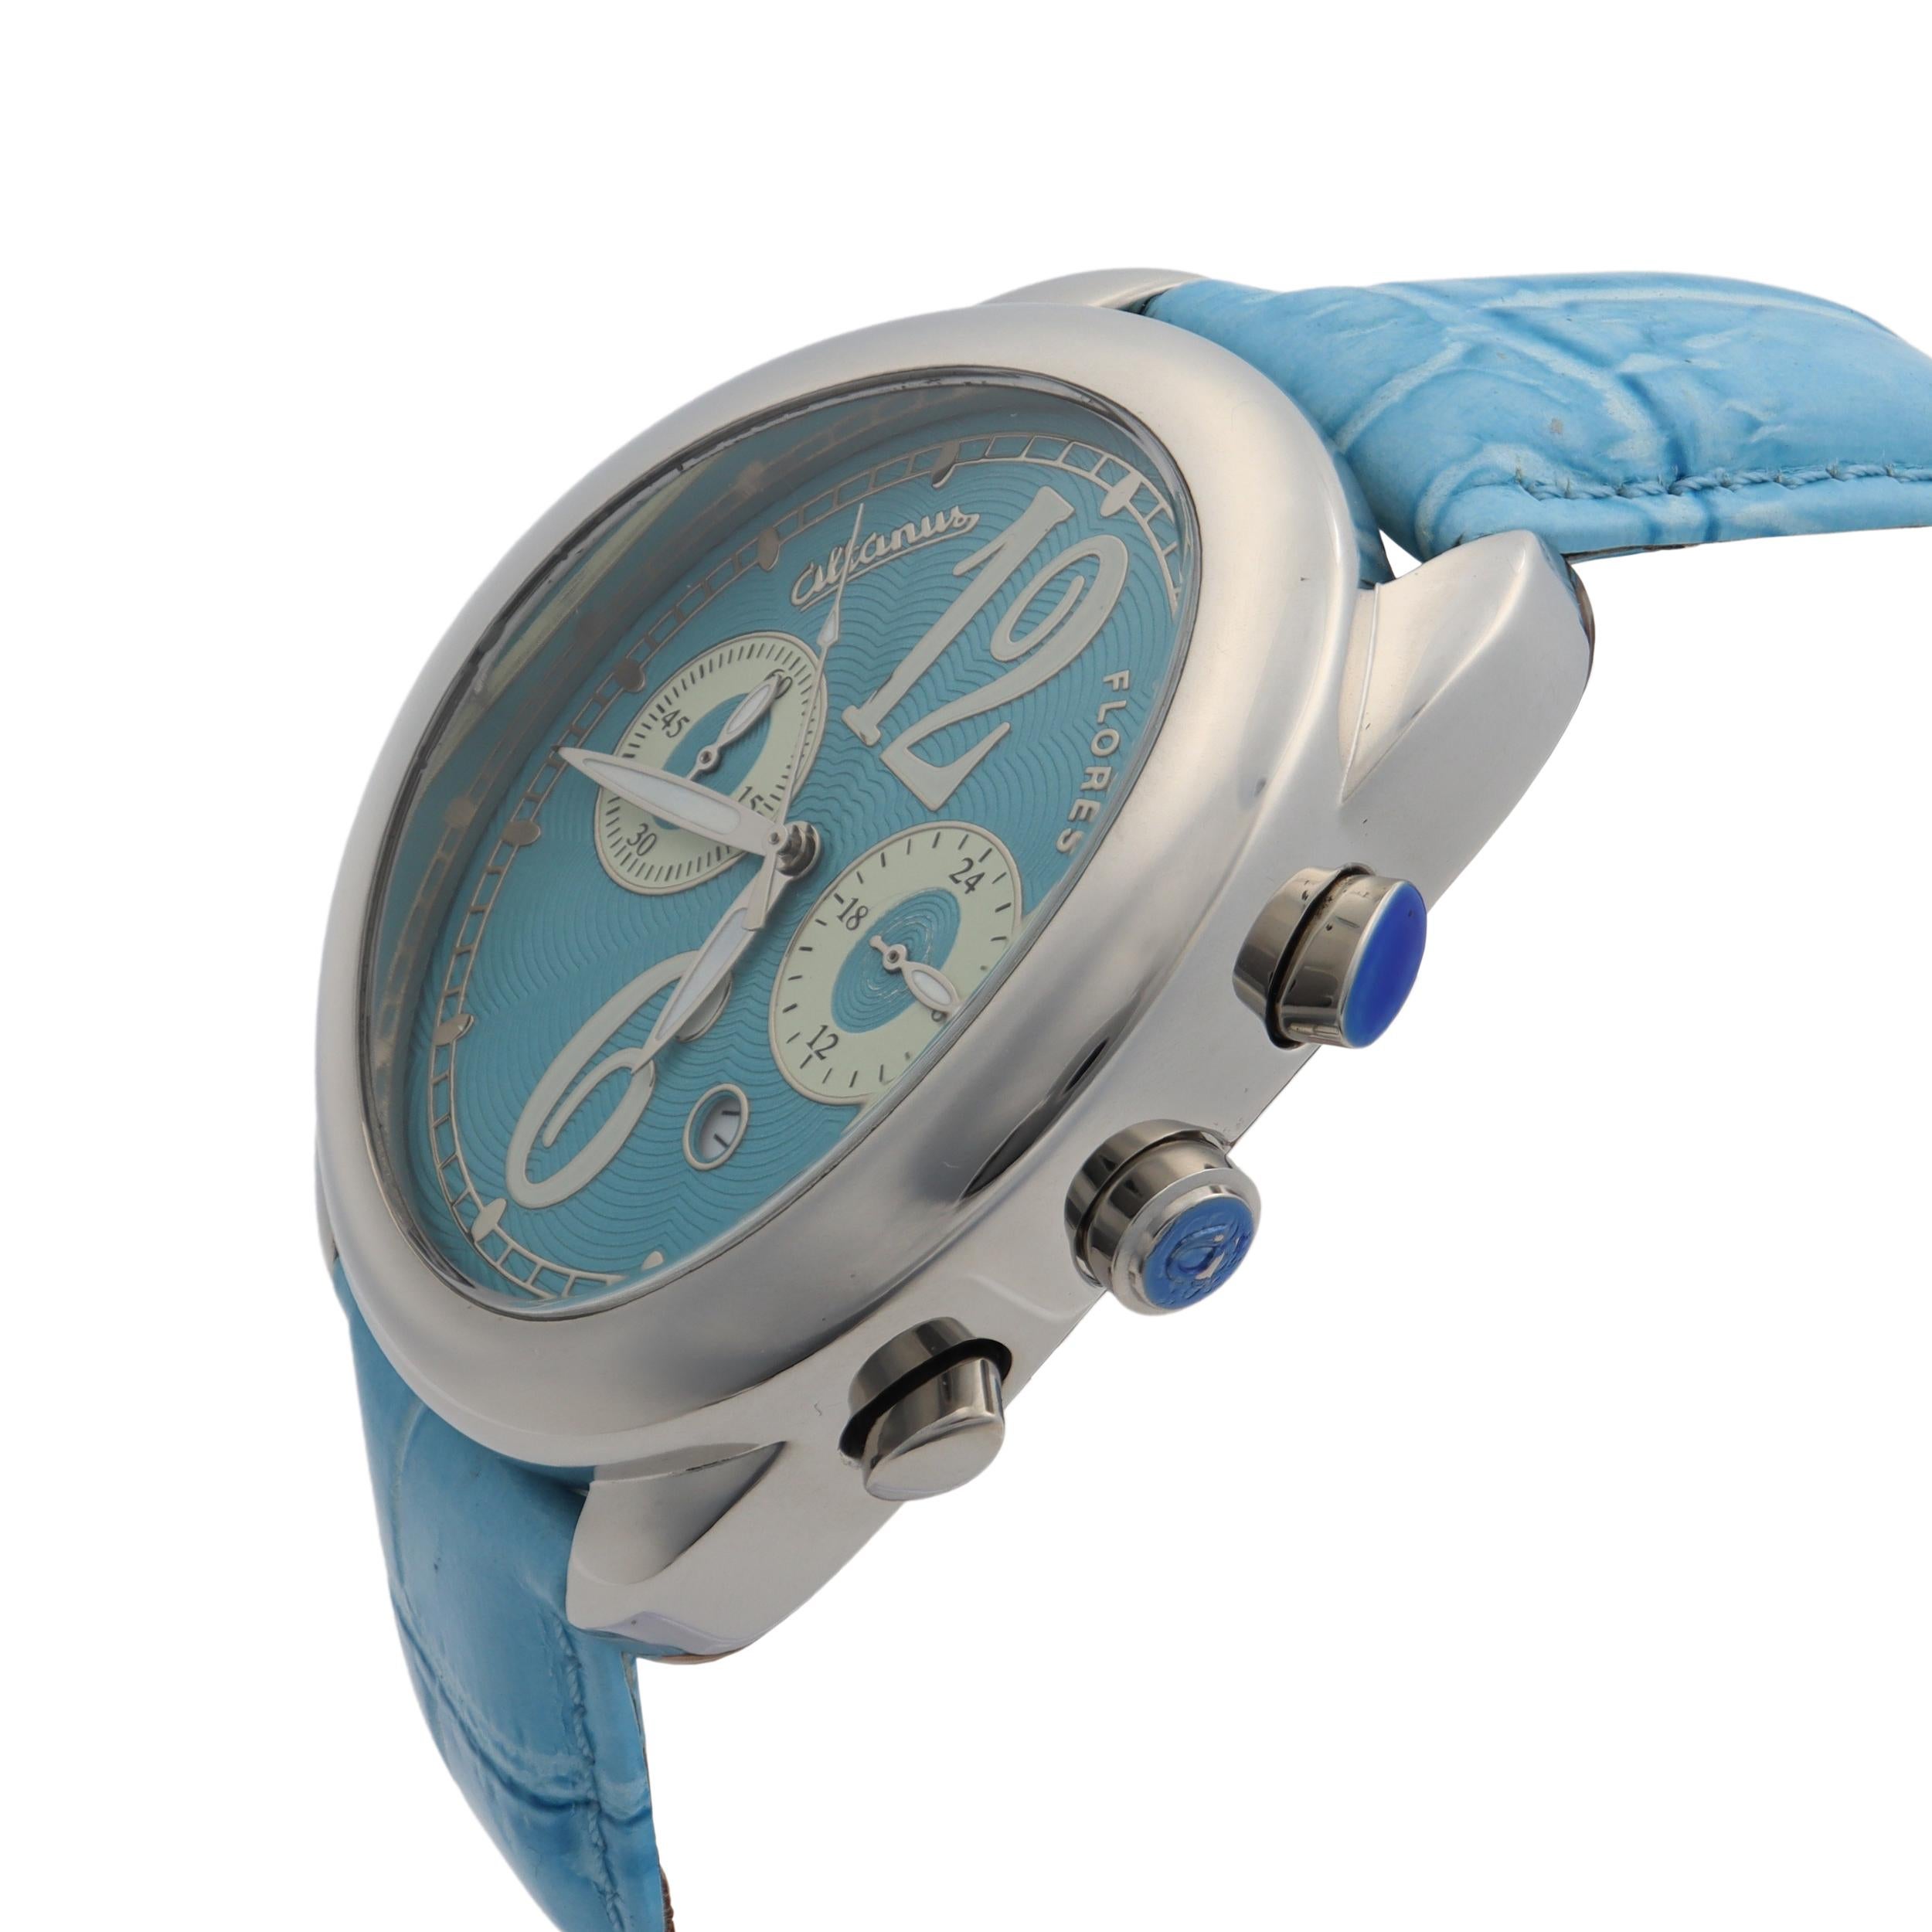 Unworn Altanus Flores Chrono Steel Sky Blue Dial Quartz Ladies Watch. No Original Box and Papers are Included. Chronostore Presentation Box and Authenticity Card are included. Covered by 1-year Chronostore Warranty. 
Details:
MSRP 280
Brand